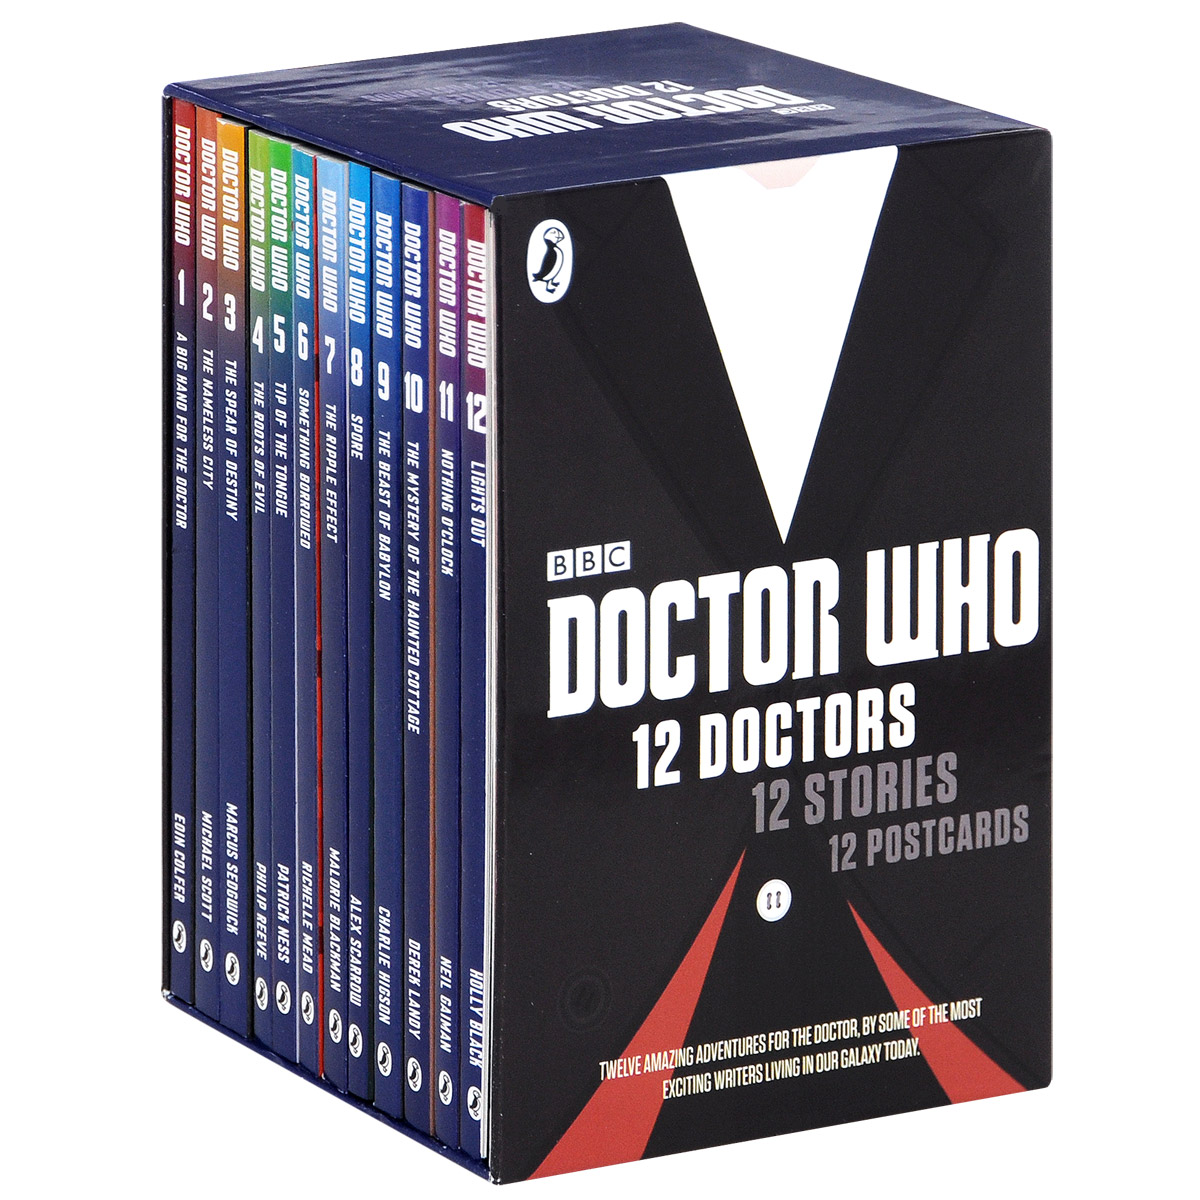 Doctor Who (Slipcase of 12 Books + 12 Postcards)